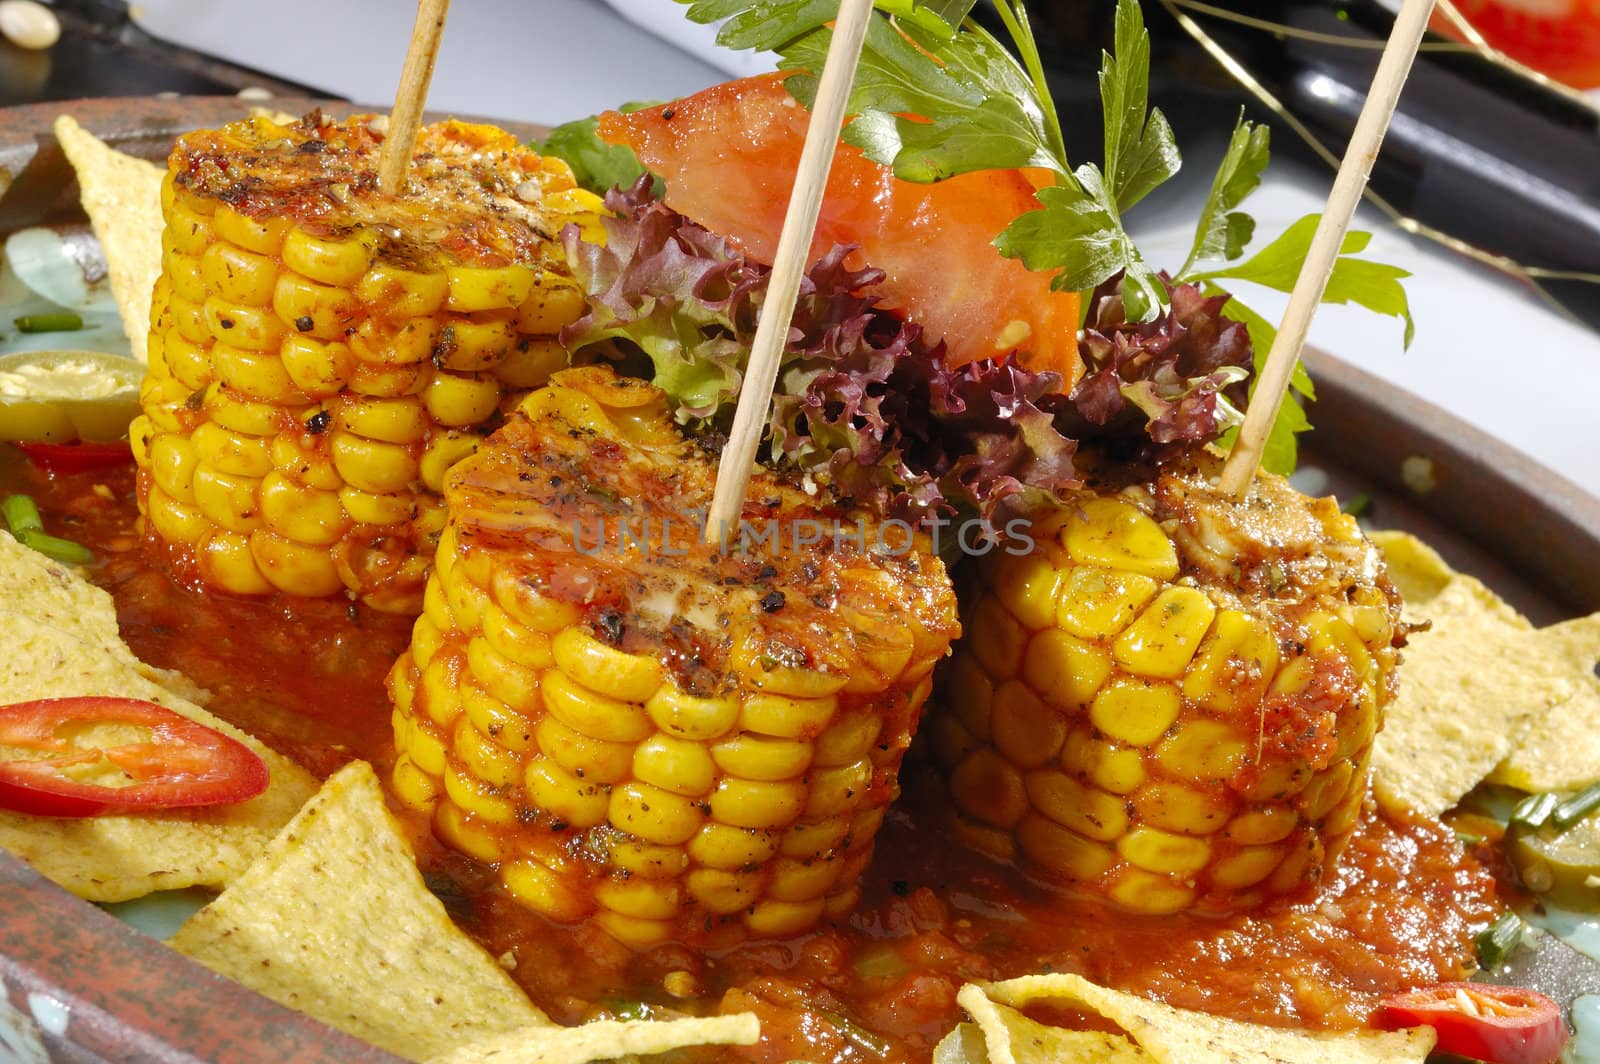 Baked corn with salsa and tortila chips